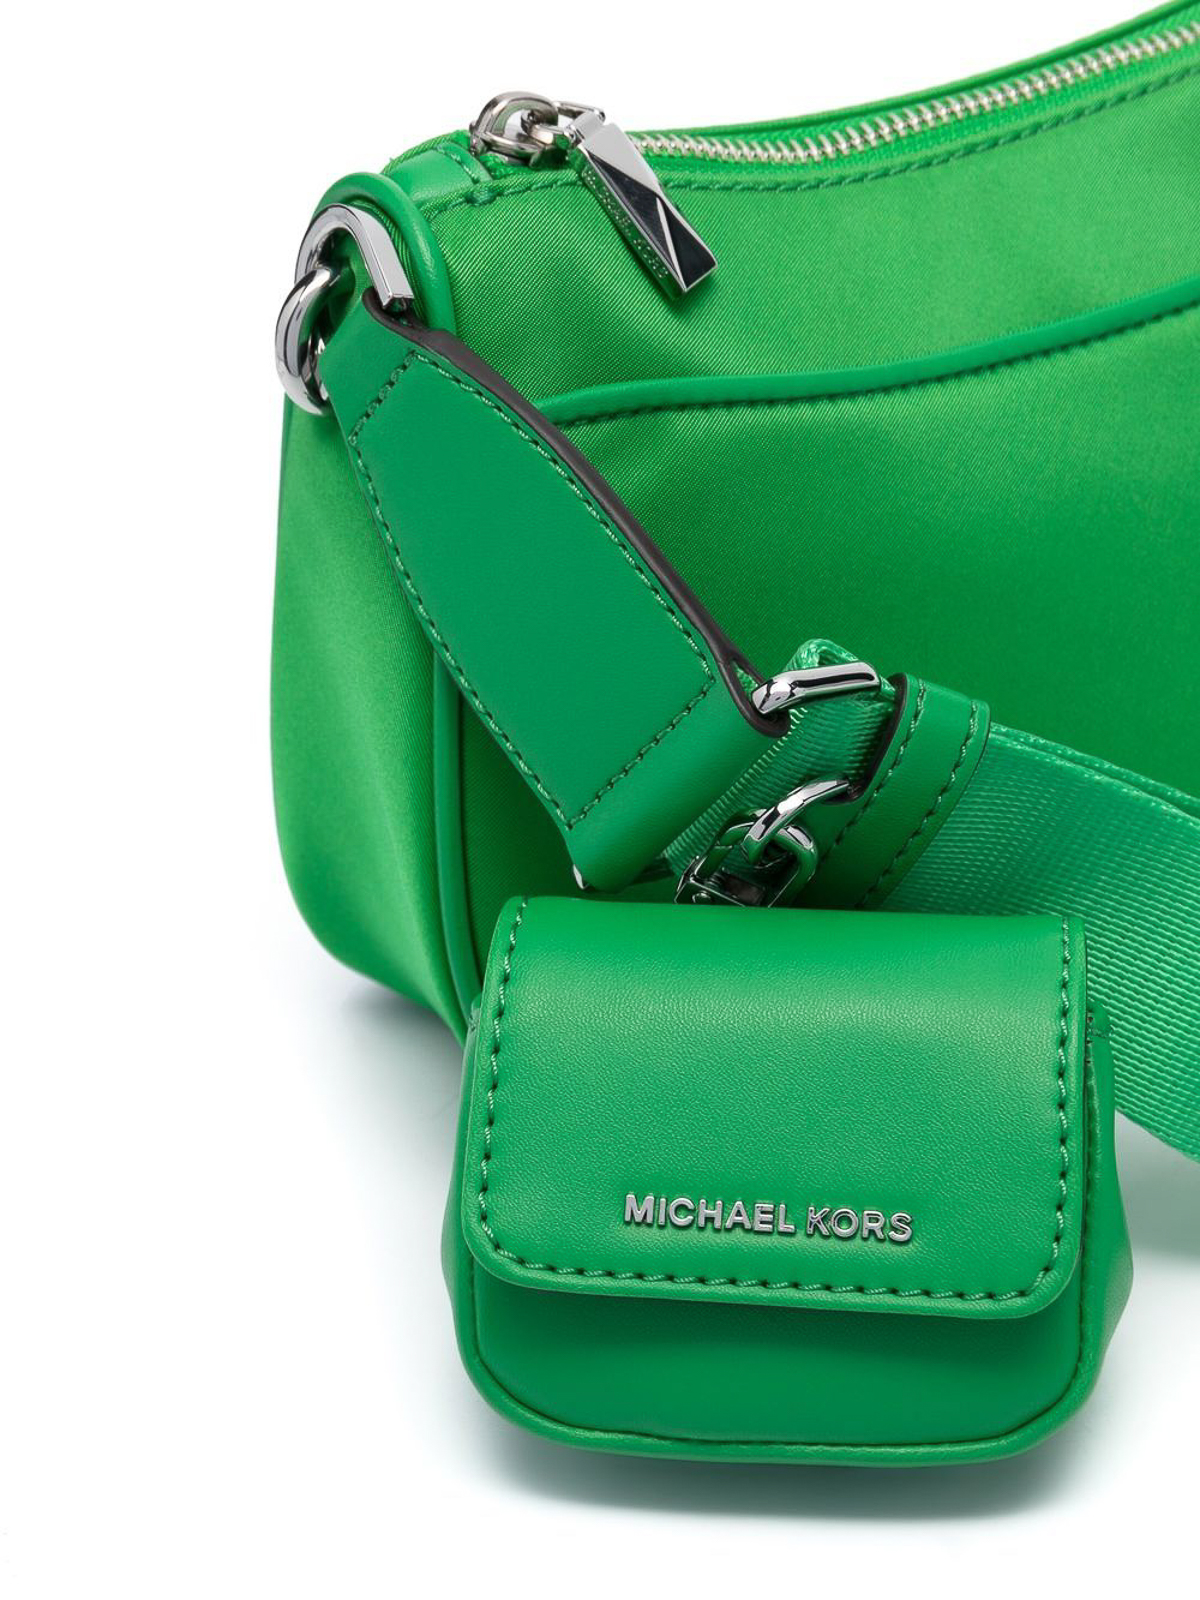 Michael Kors Brown Coin Purse | World of Watches